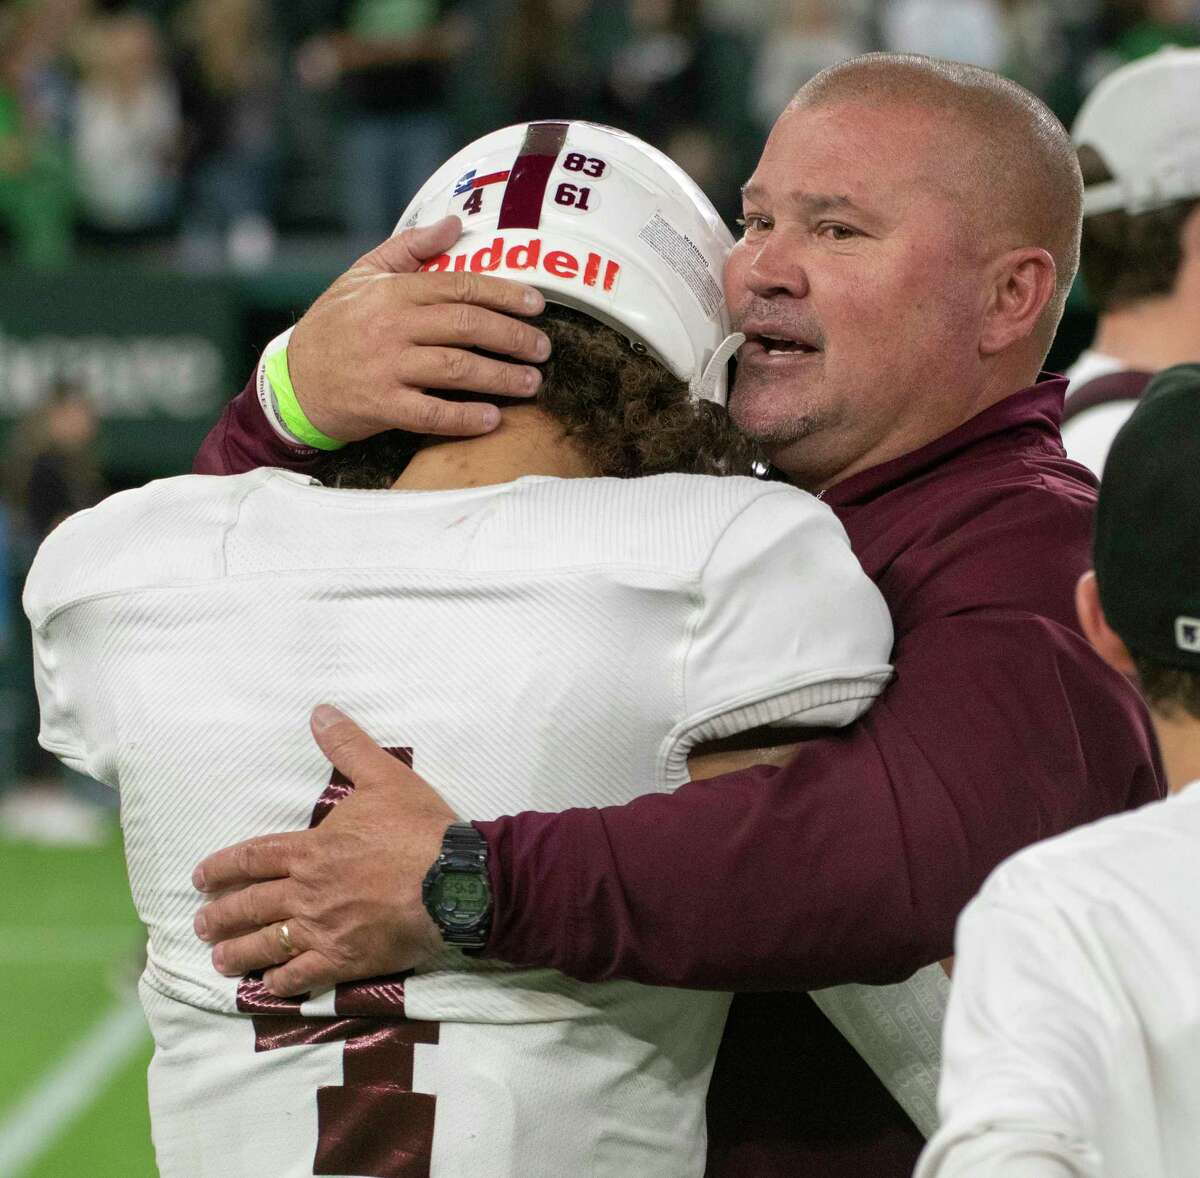 Legacy High coach Clint Hartman tries to offer some words of encouragement to Donny Bishop 11/20/2021 during the Class 6A Division 1 area round playoff against South Lake Carroll at Globe Life Field in Arlington with a final score of South Lake 42, LHS 7. Tim Fischer/Reporter-Telegram